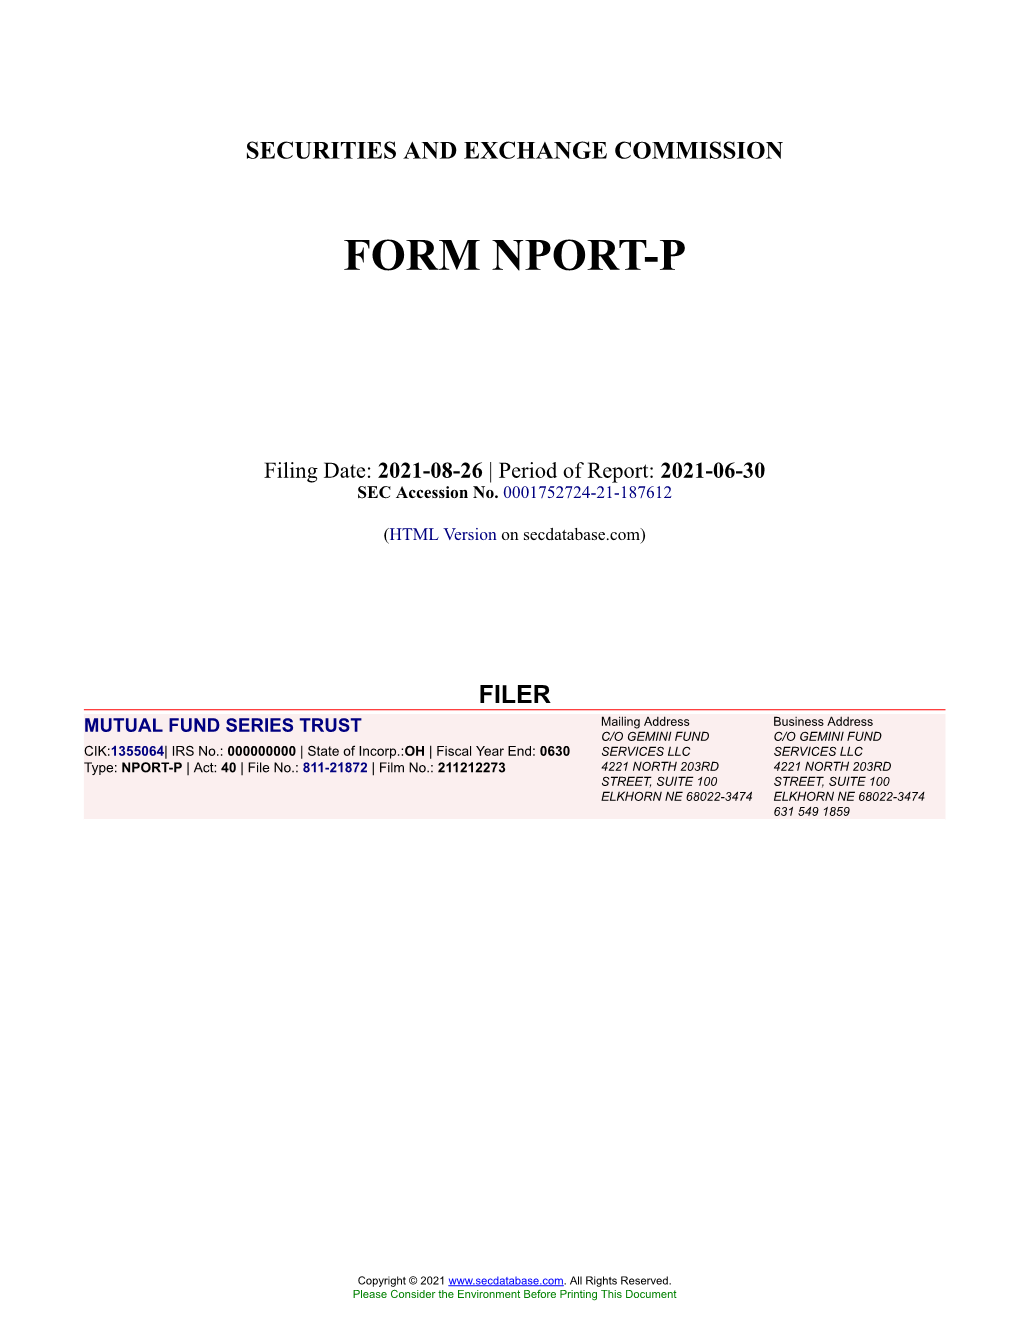 MUTUAL FUND SERIES TRUST Form NPORT-P Filed 2021-08-26